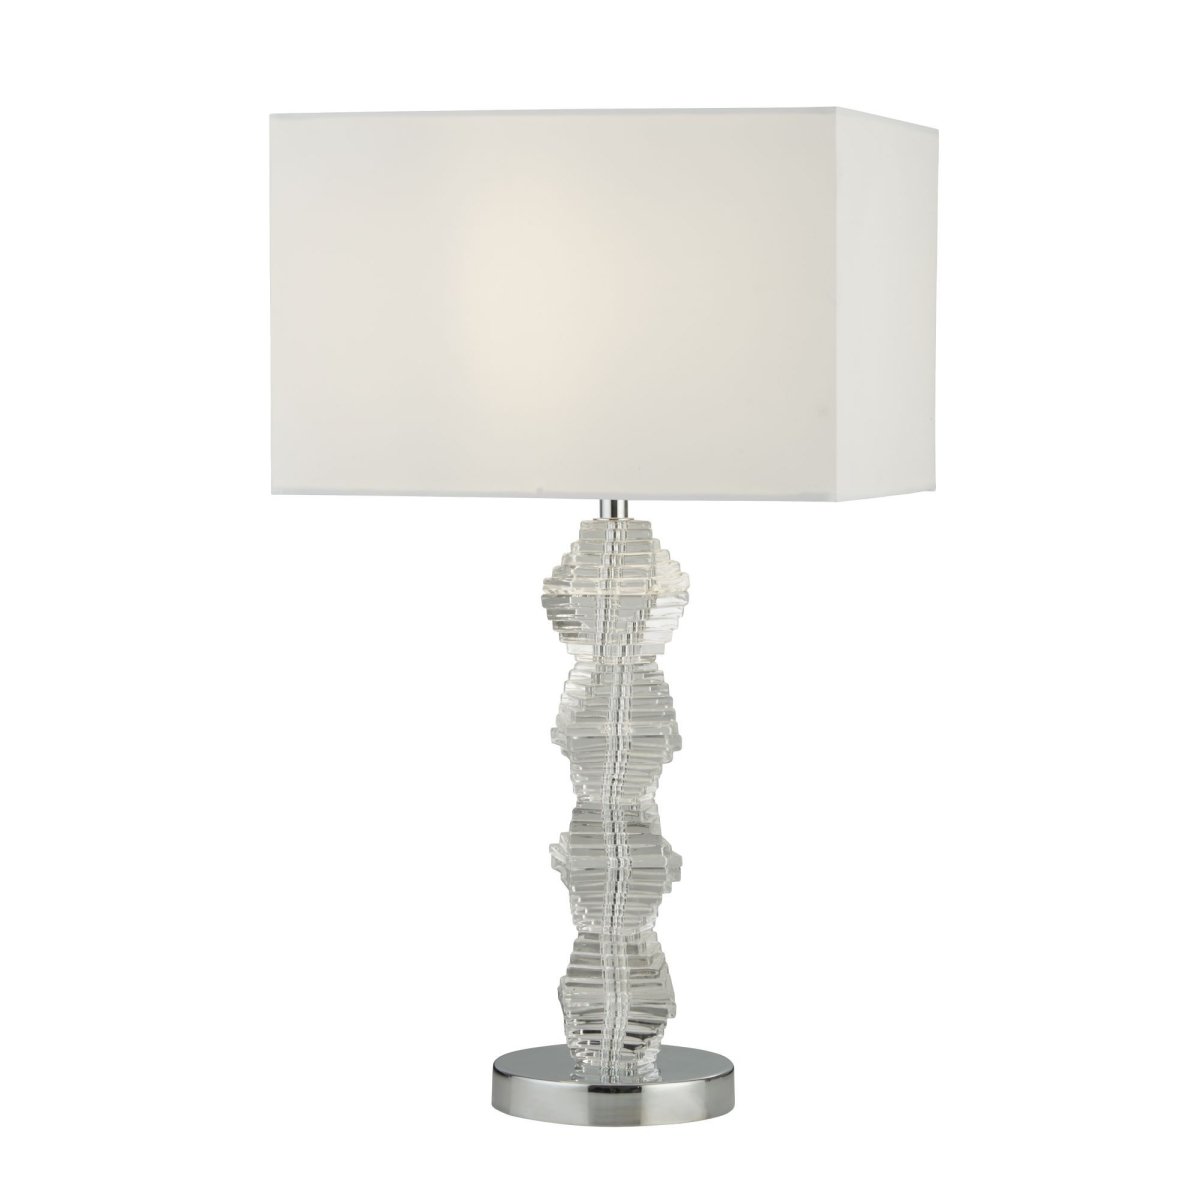 Malinda 1 Light Table Lamp Chrome And Glass With White Shade - Bonnypack